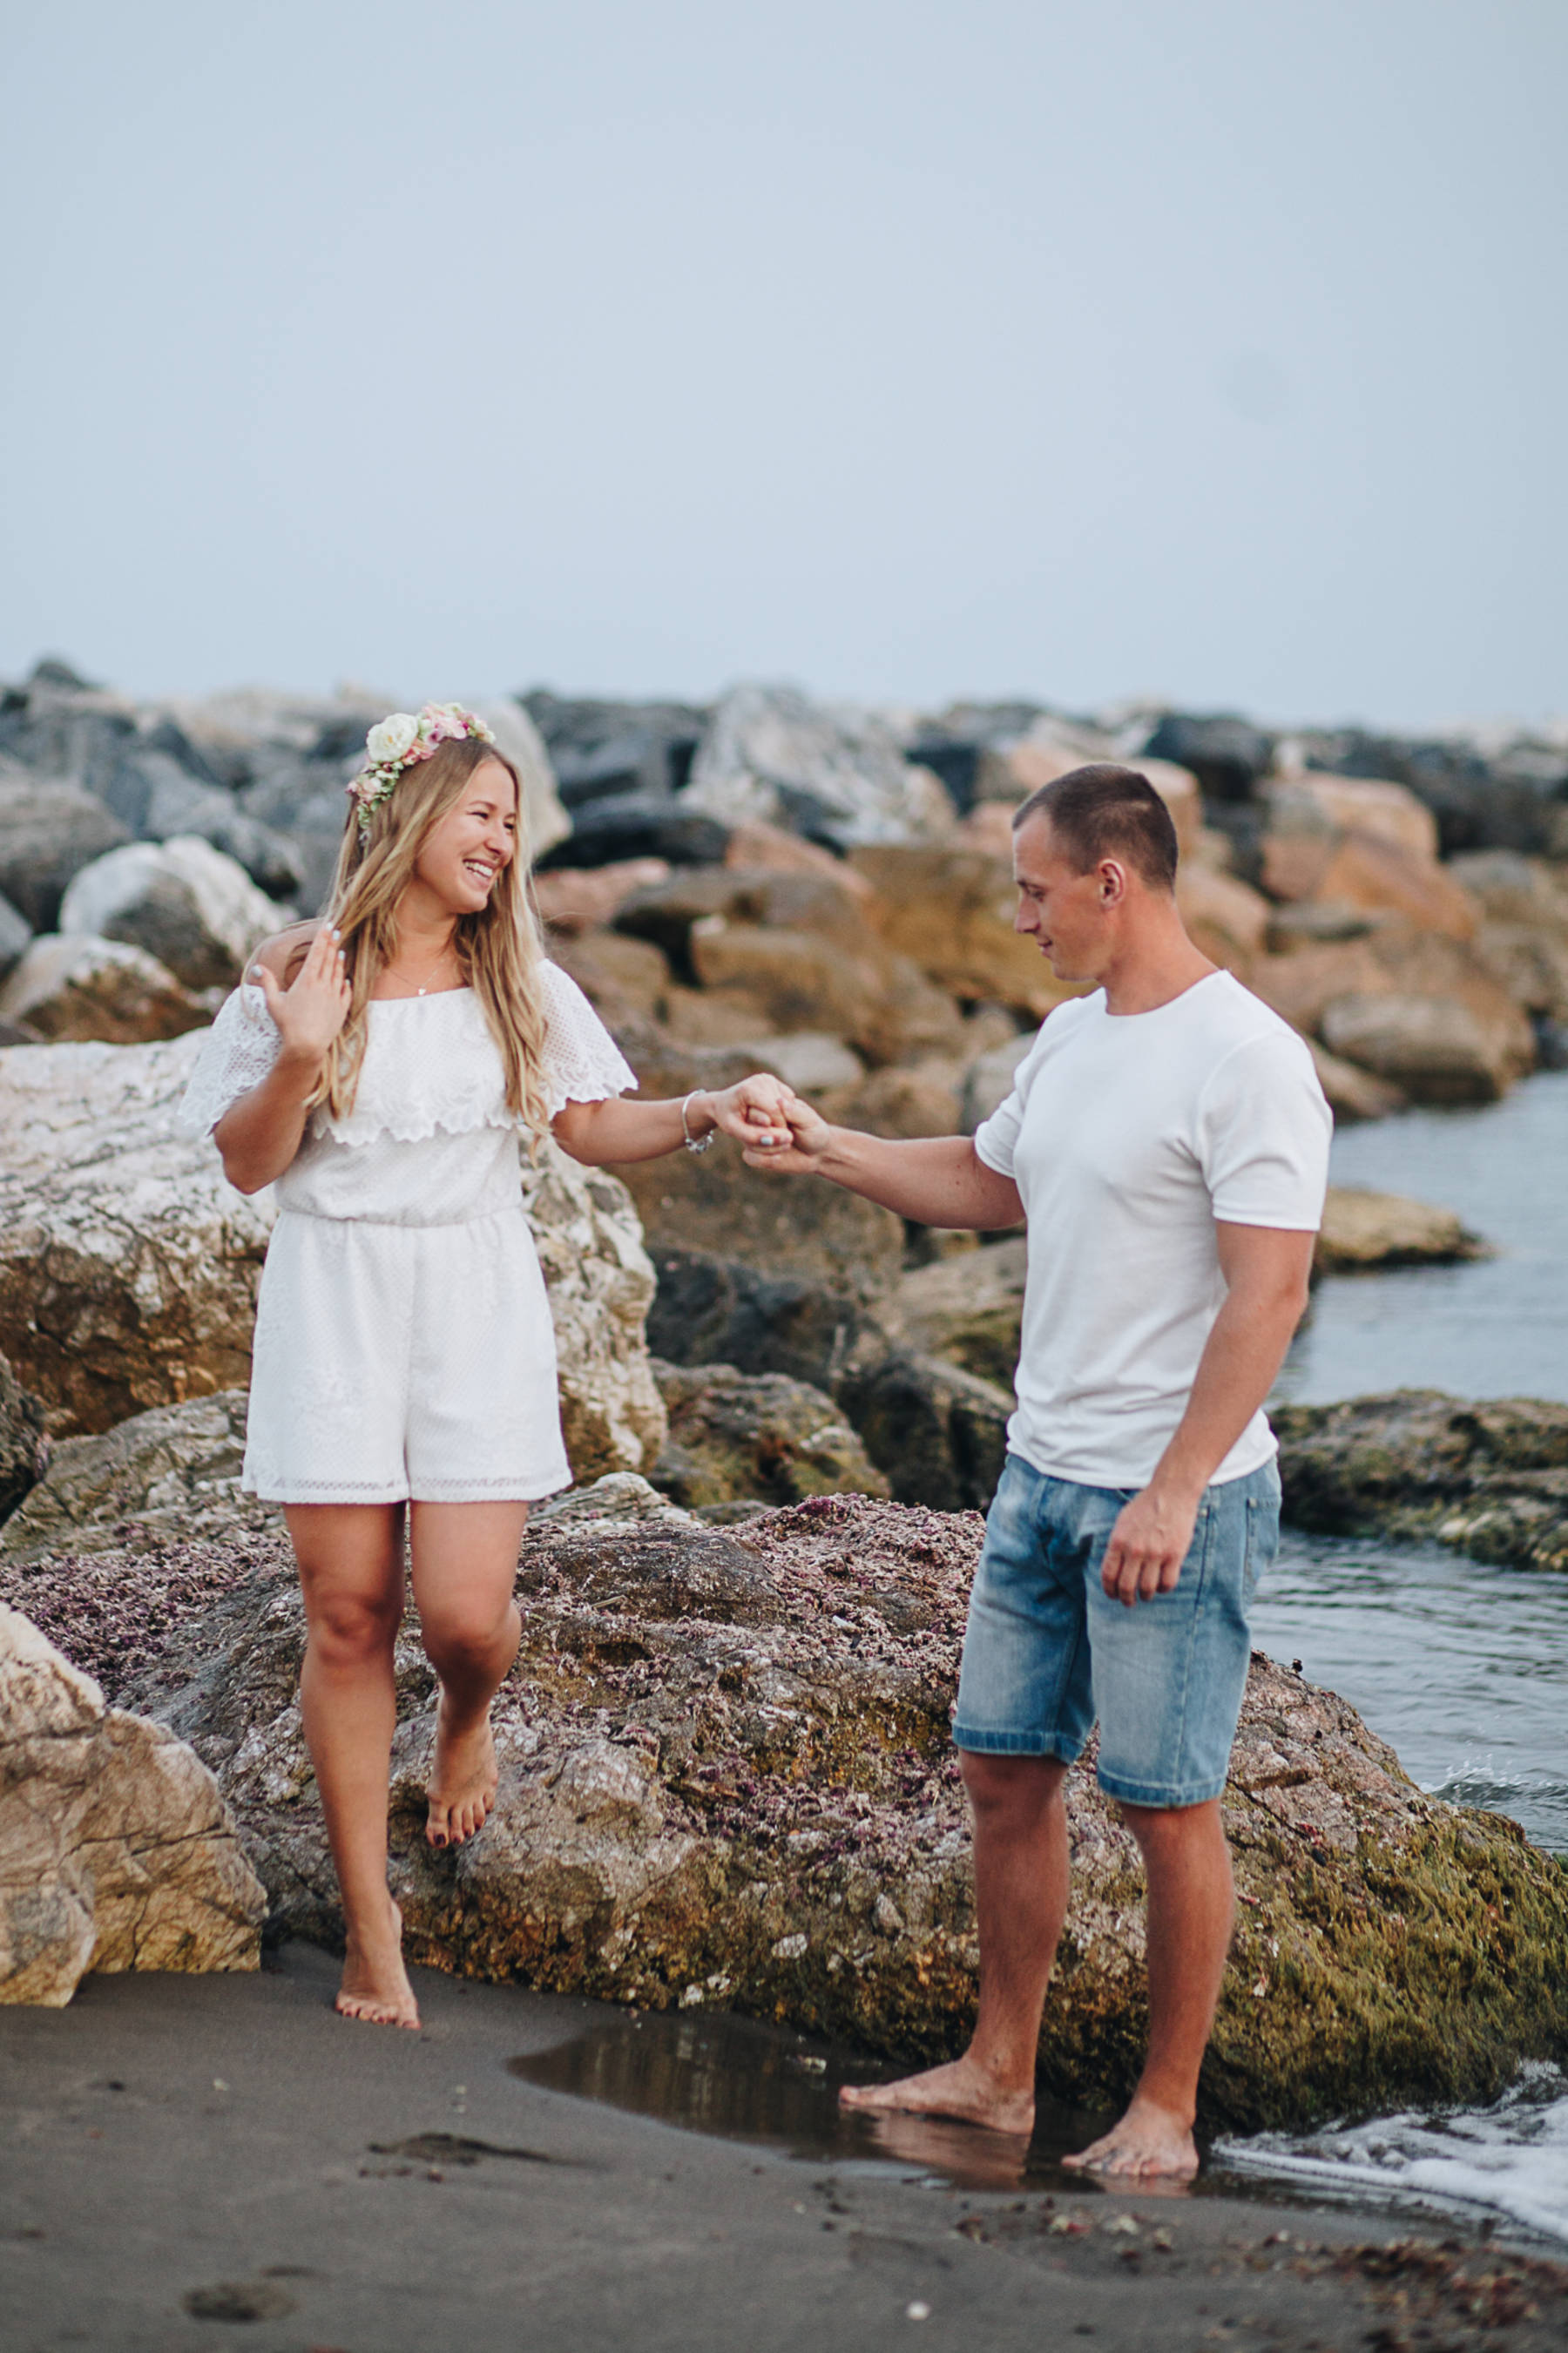 Love story photo session in Cabopino